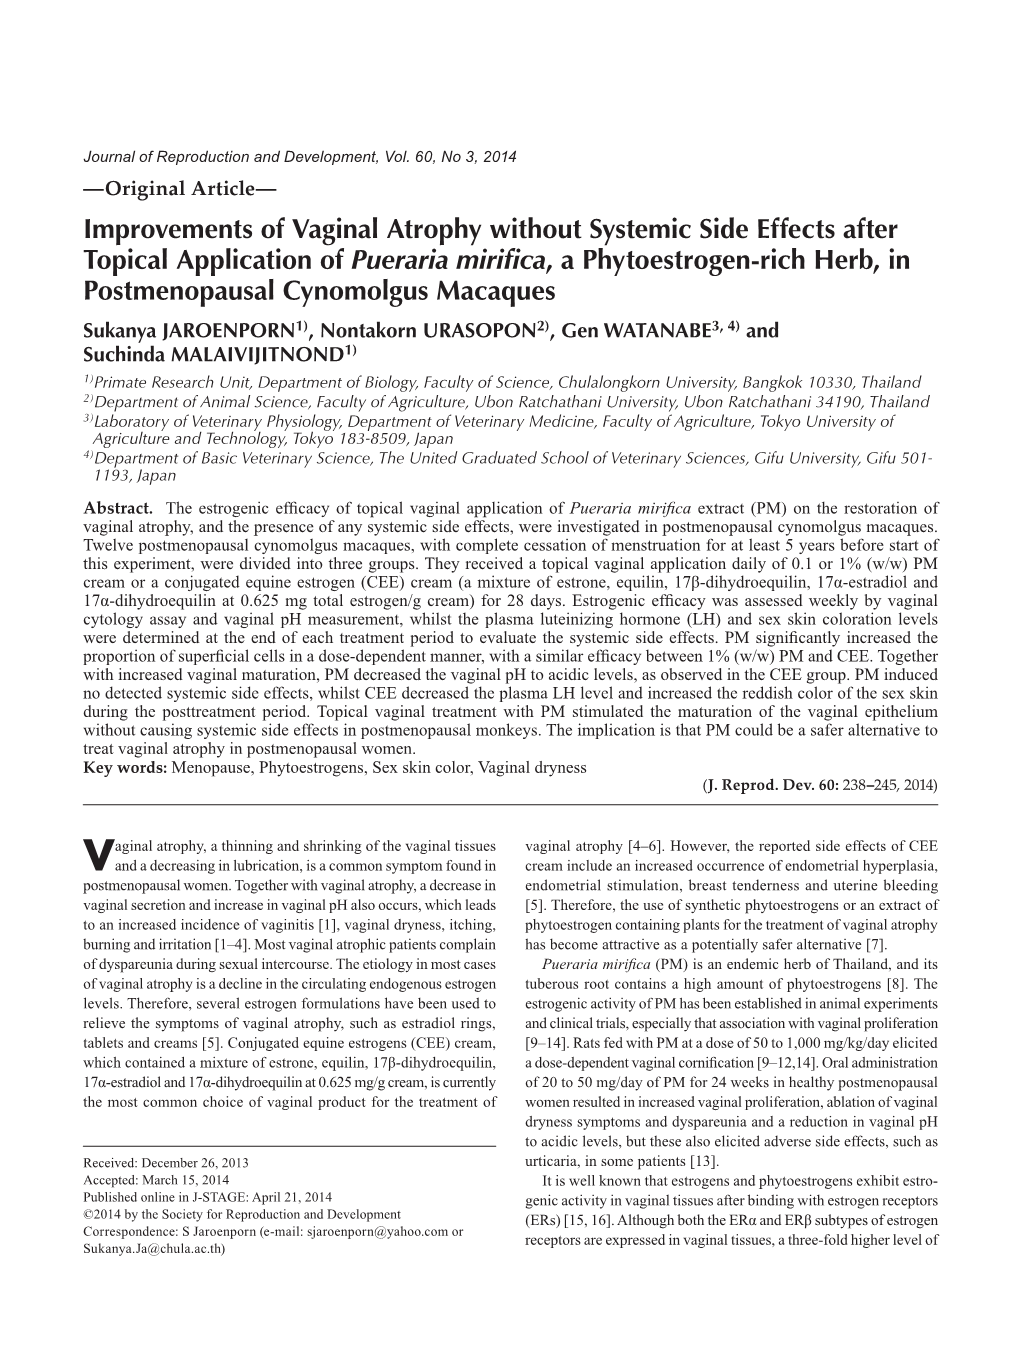 Improvements of Vaginal Atrophy Without Systemic Side Effects After